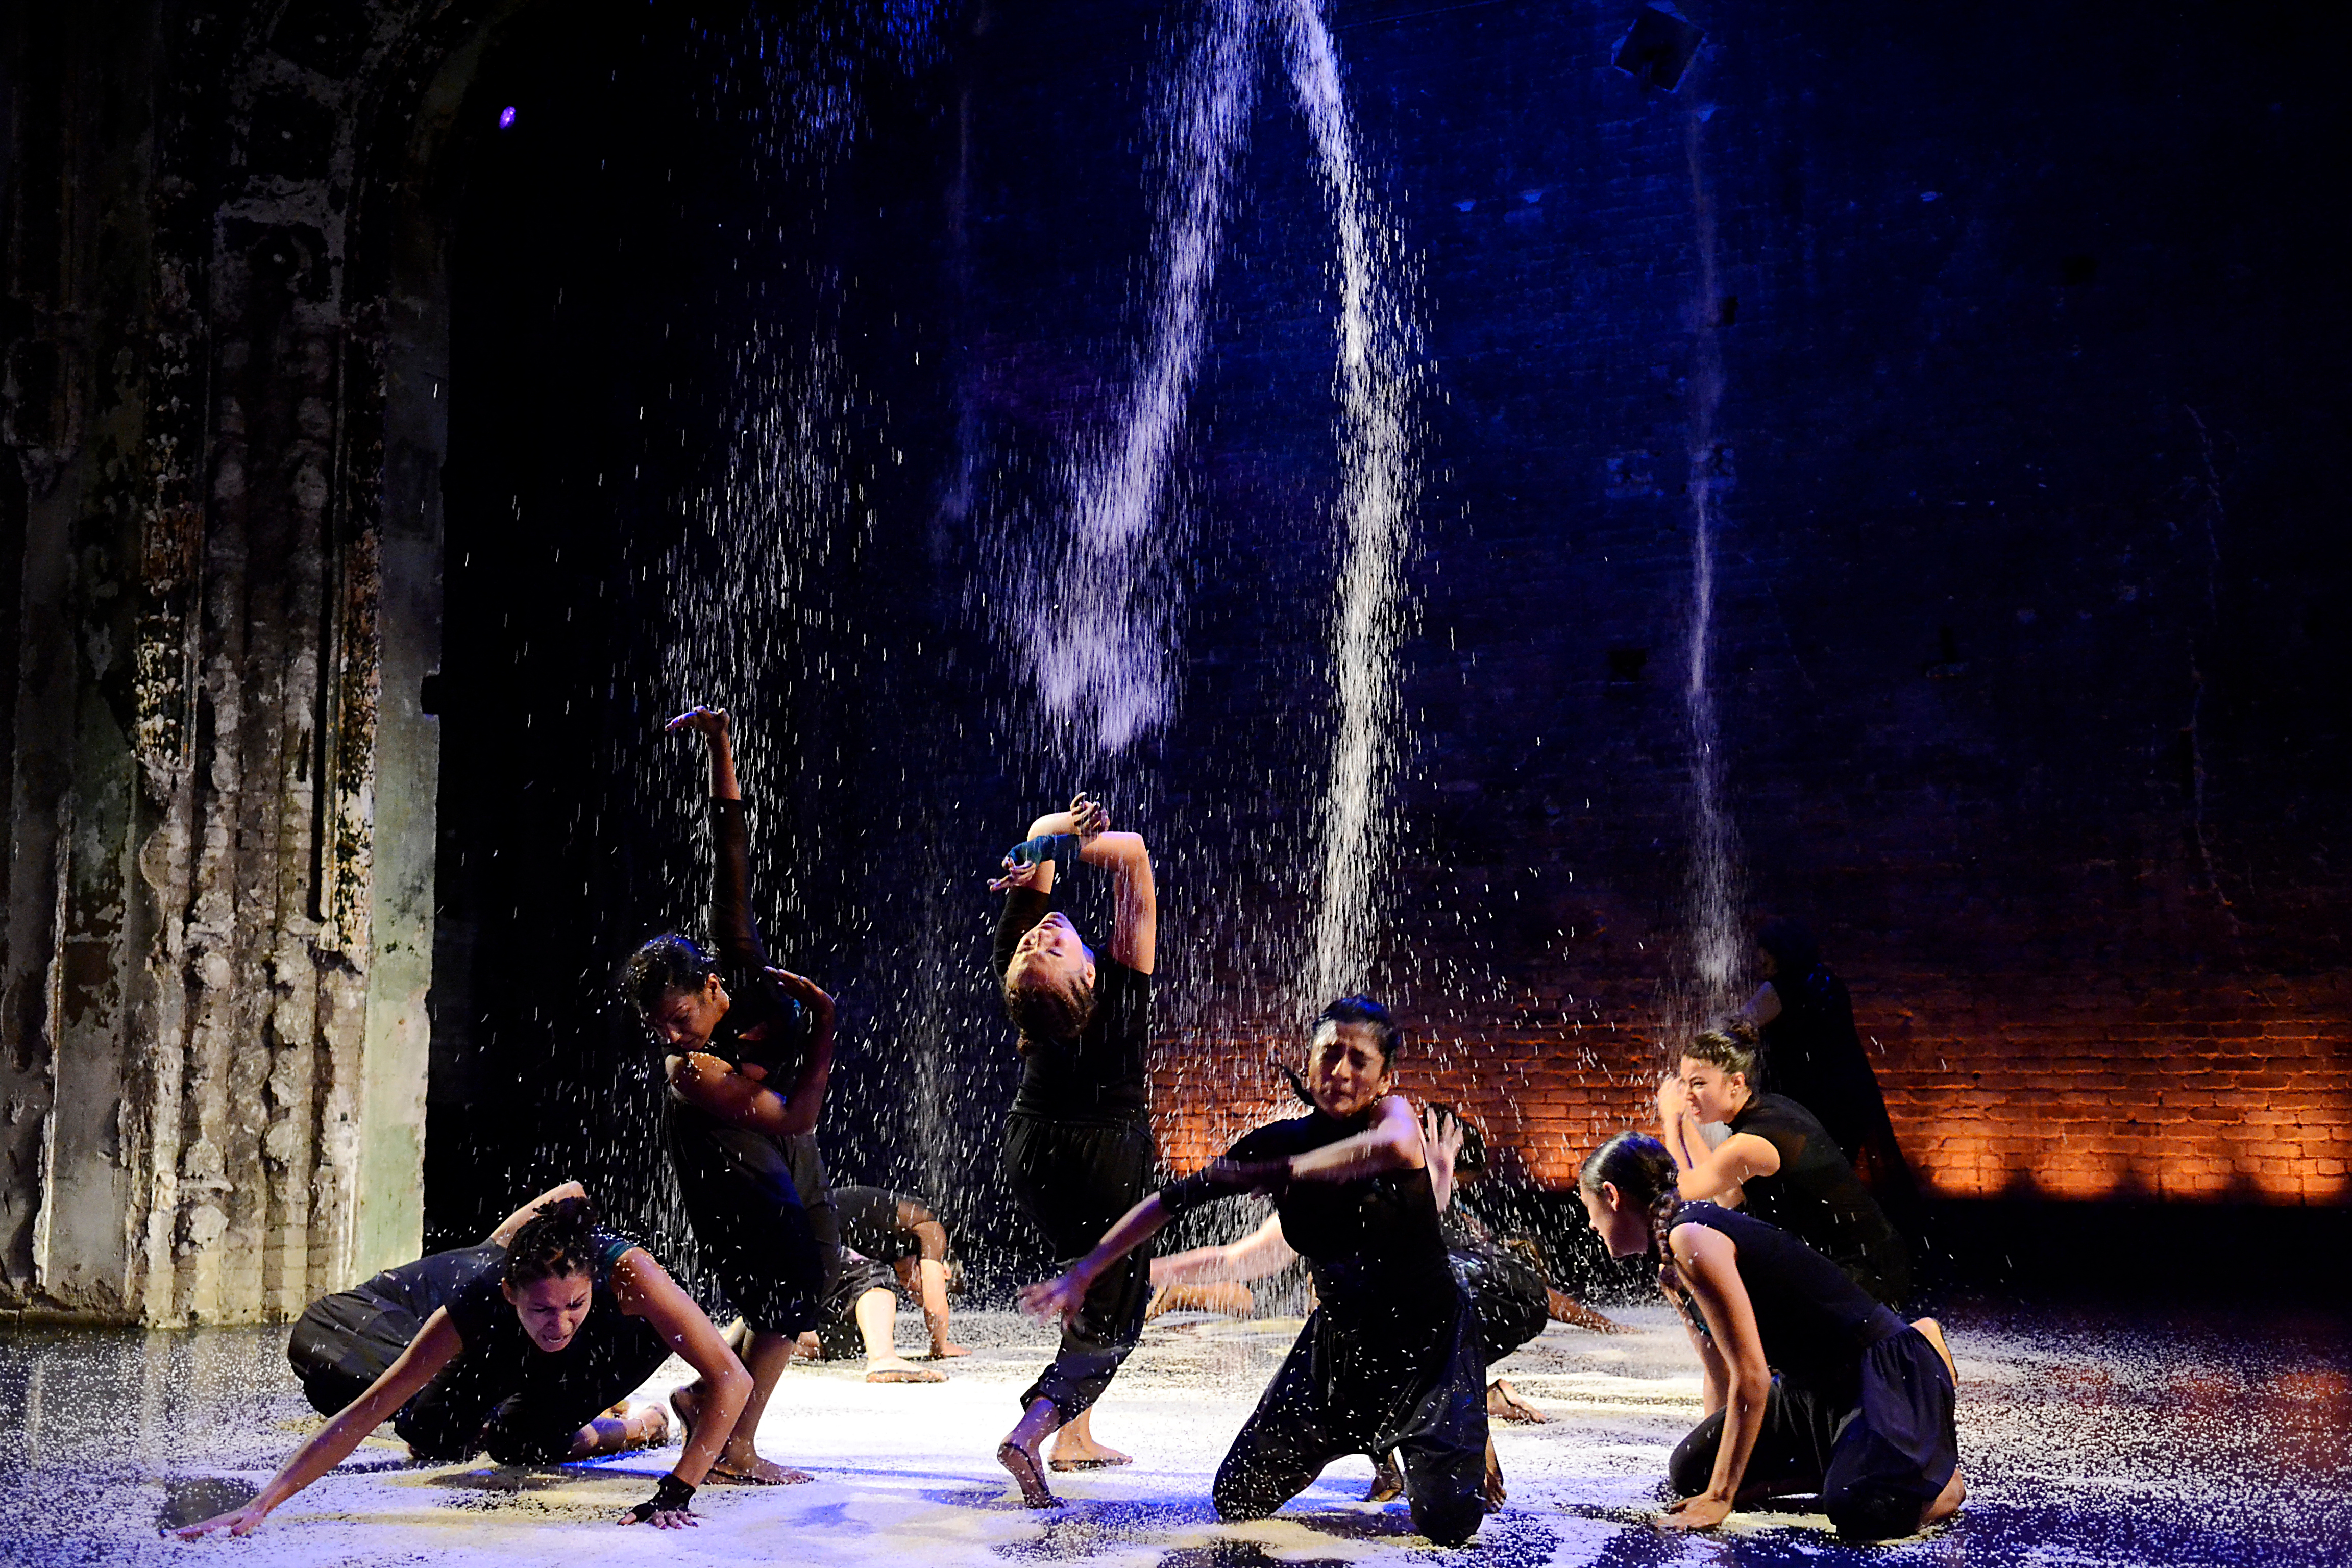 A group of female dancers on stage pounding the stage as water falls on them.